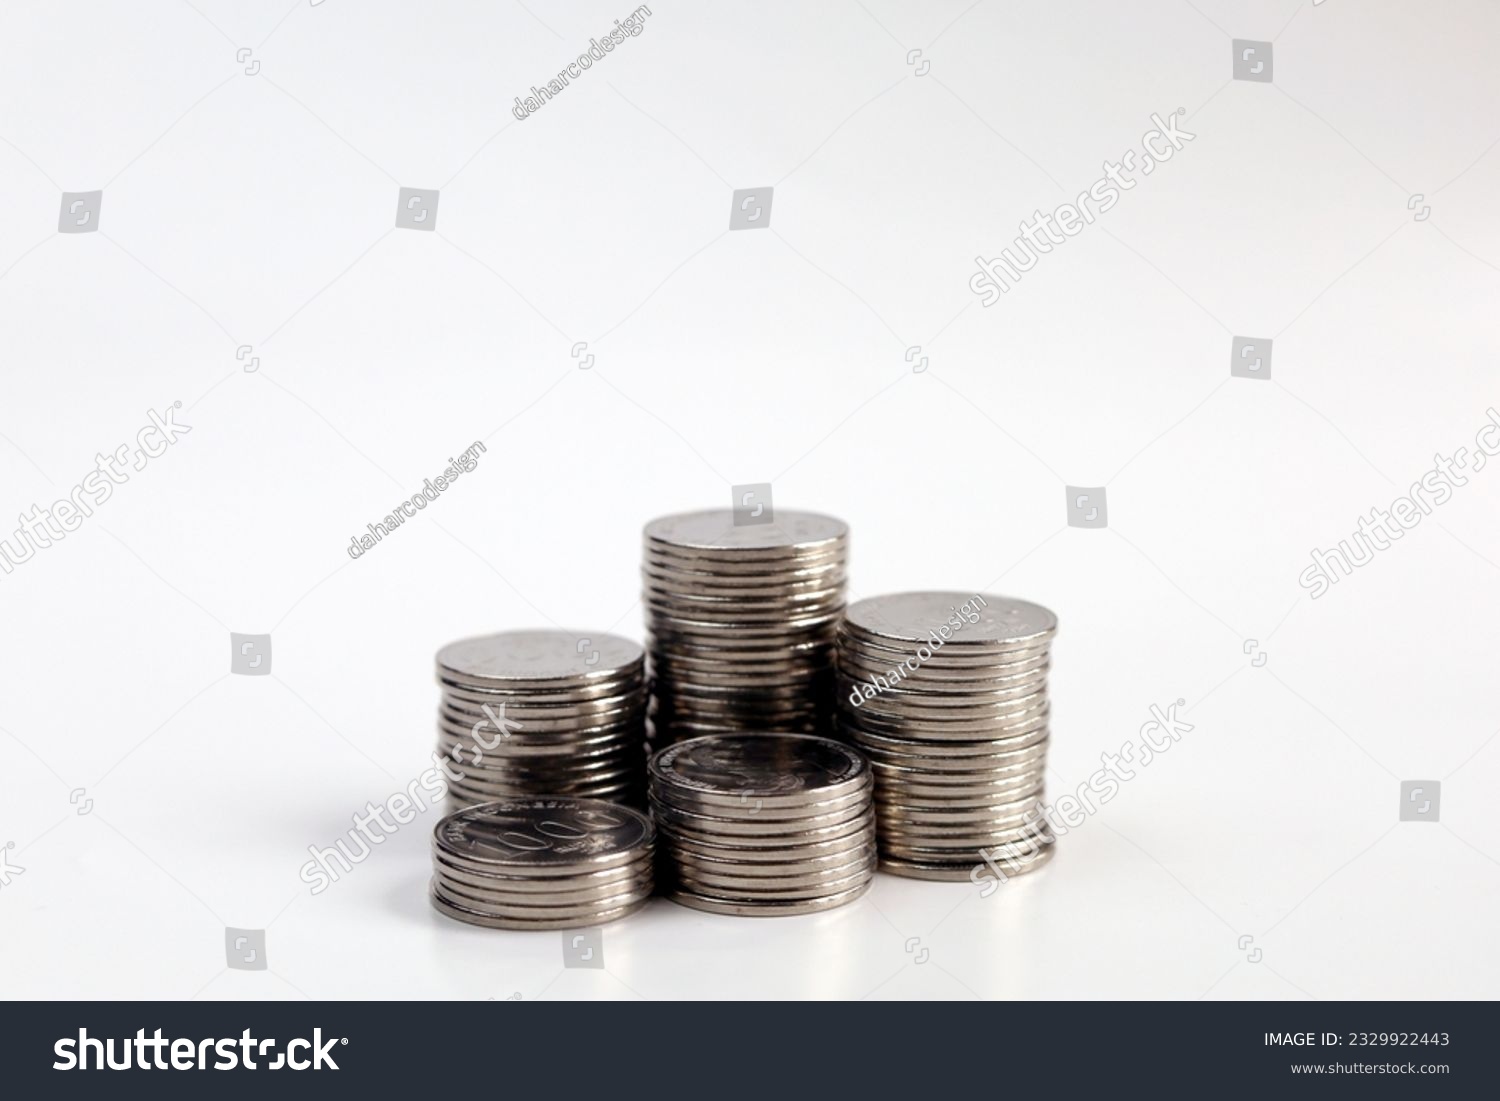 Coins stack isolated on white background. Indonesia coins currency #2329922443